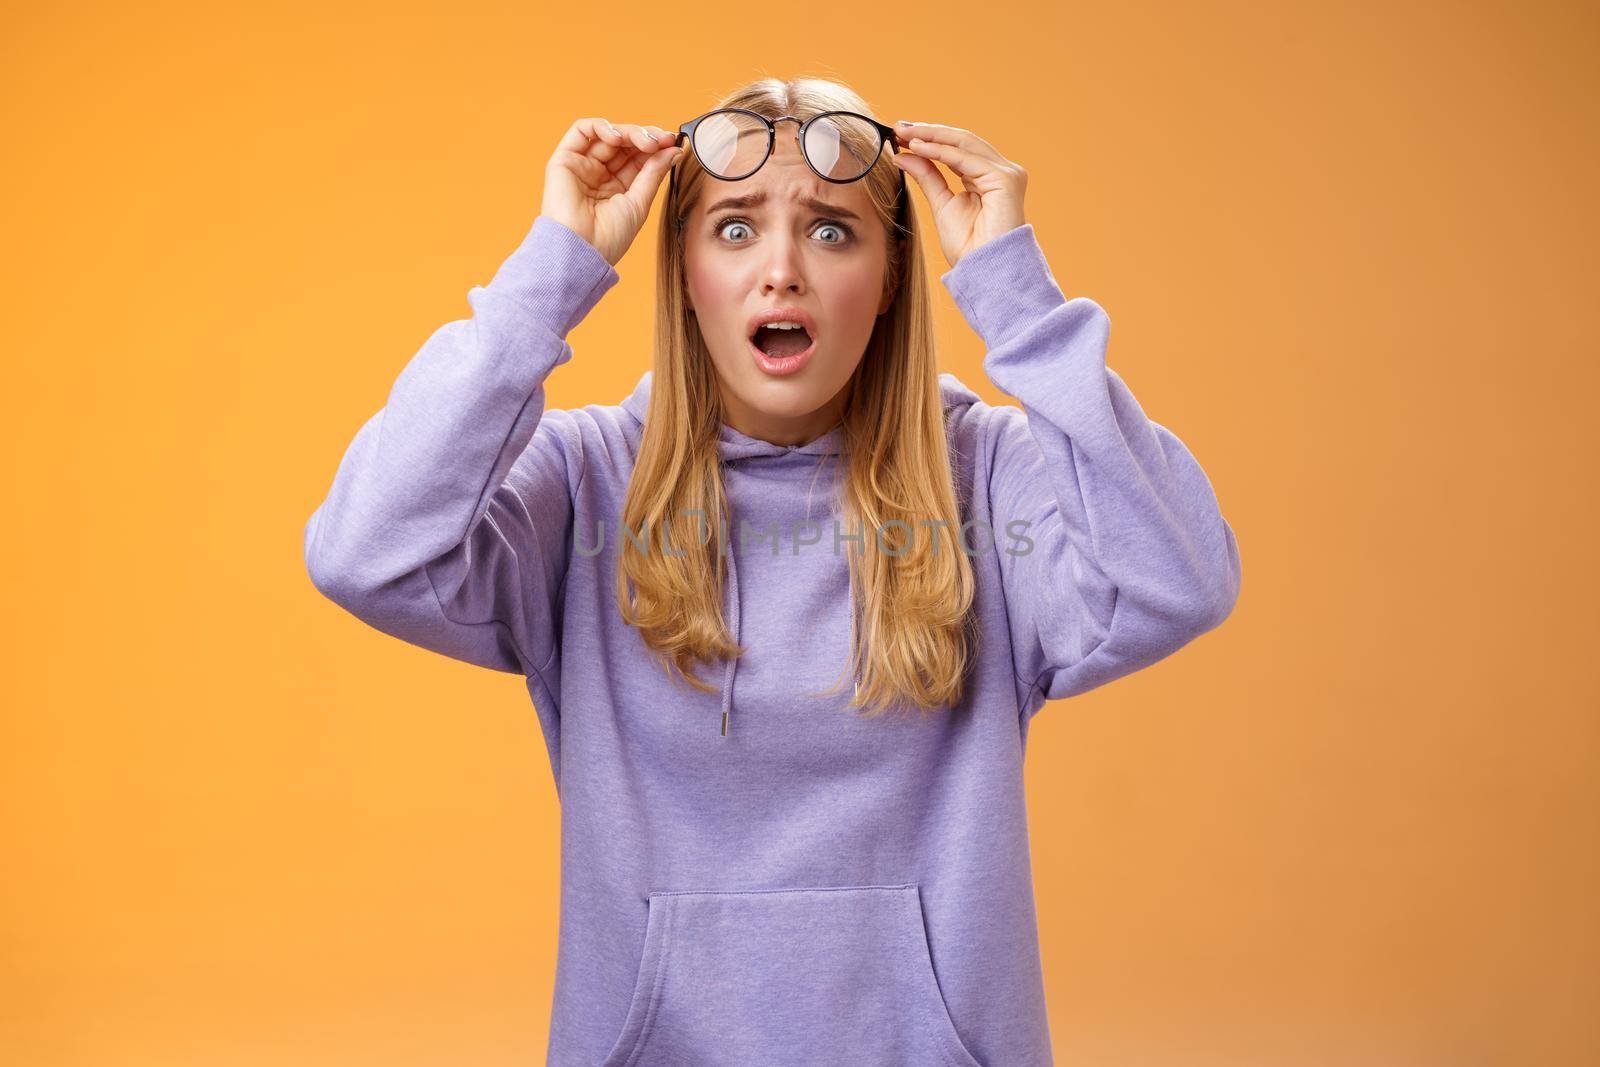 Shocked concerned young woman looking student ruin work staring disturbed upset take-off glasses popping eyes camera gasping speechless terrible acciddent happened, orange background.